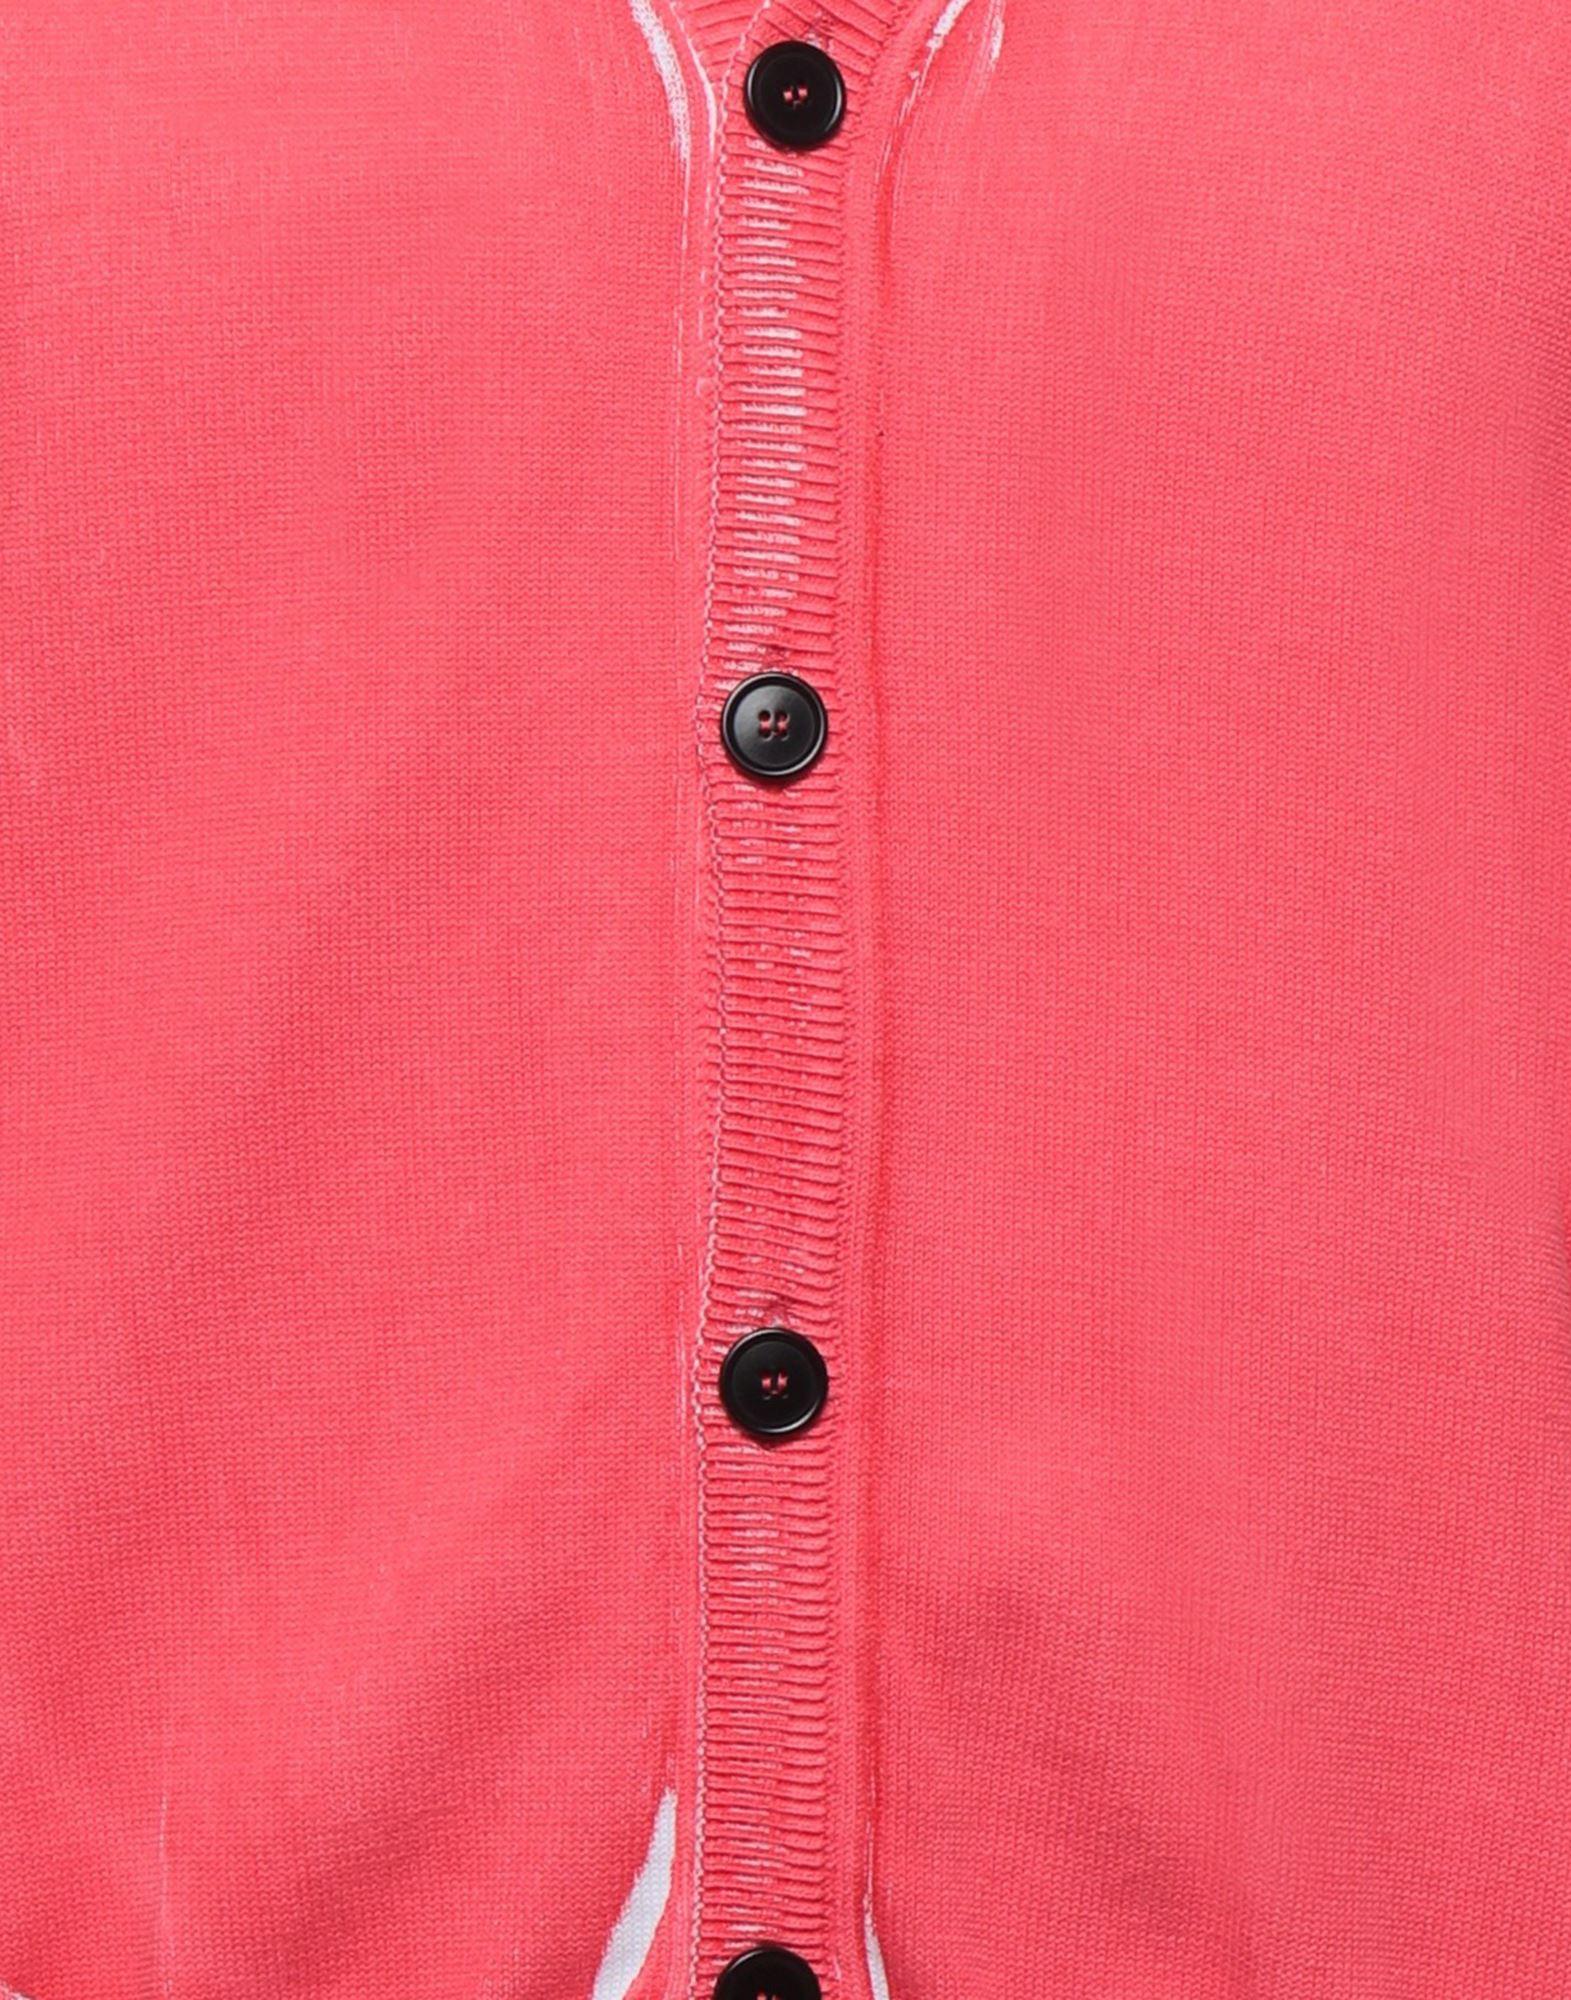 MSGM Cotton Cardigan in Coral (Pink) for Men - Lyst